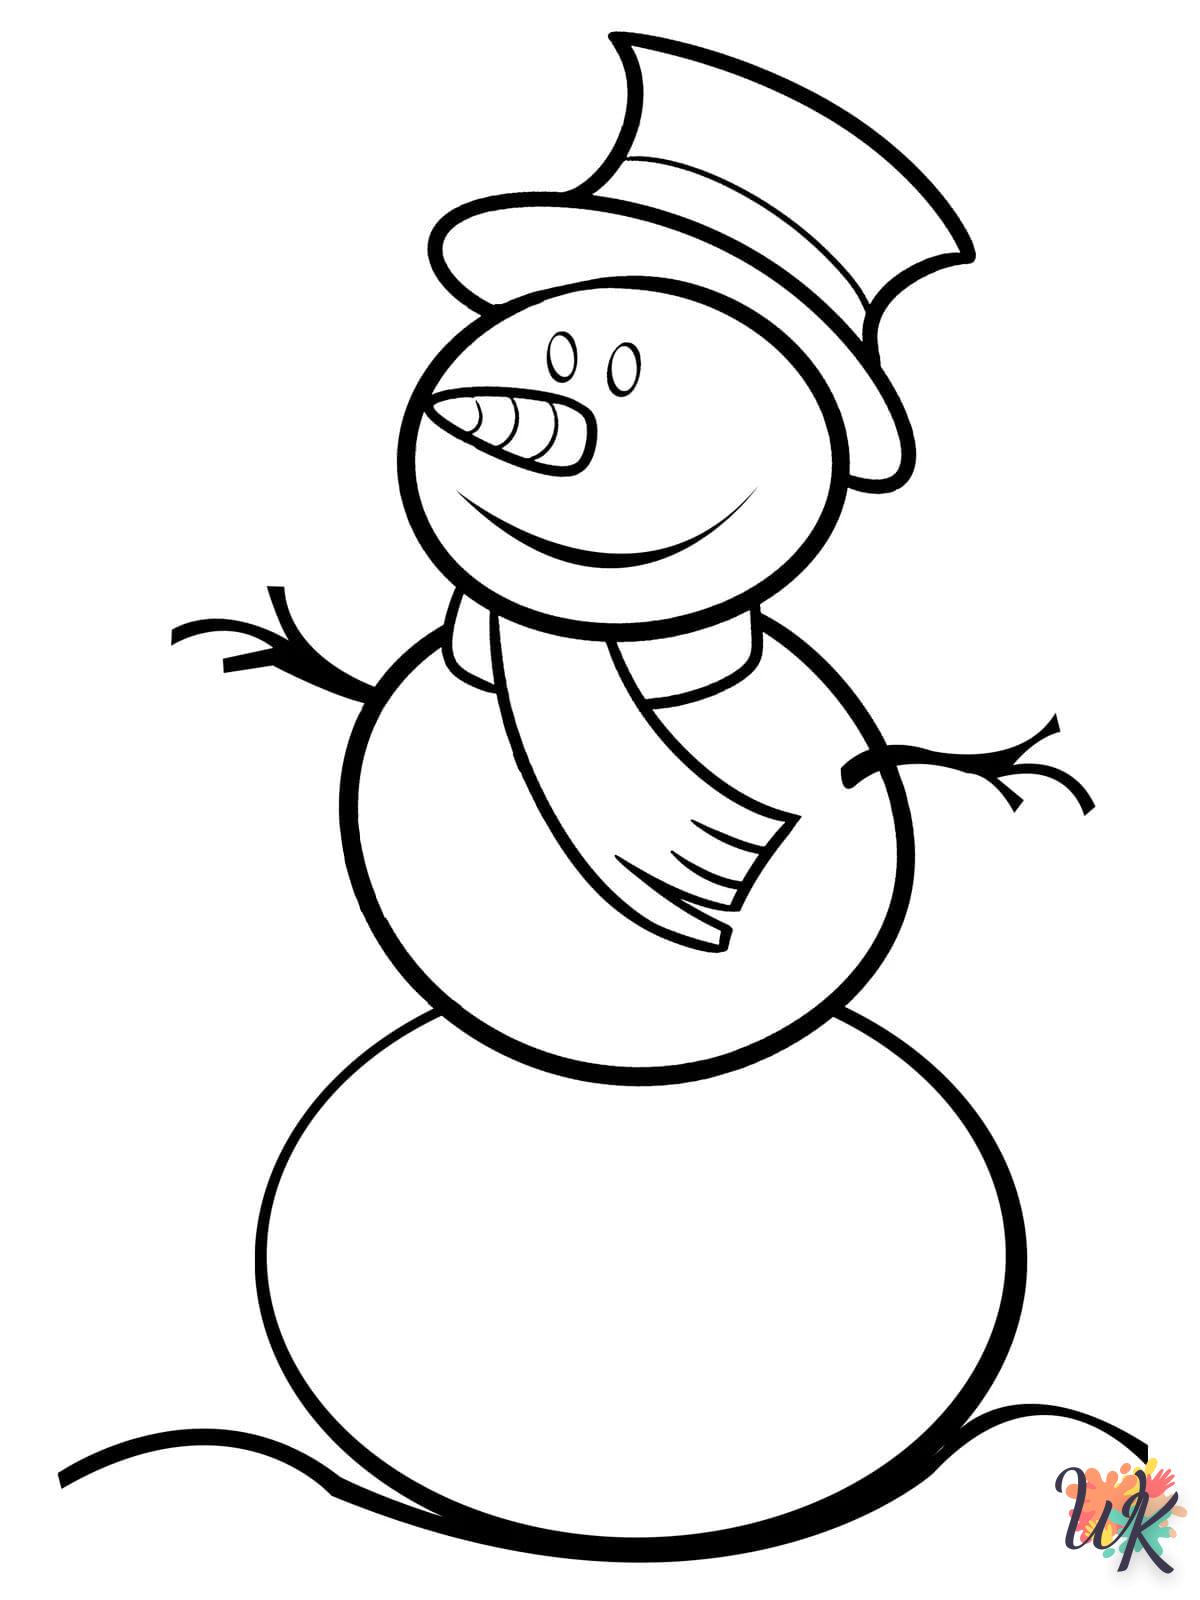 Snowman coloring page for children aged 3 to print 1